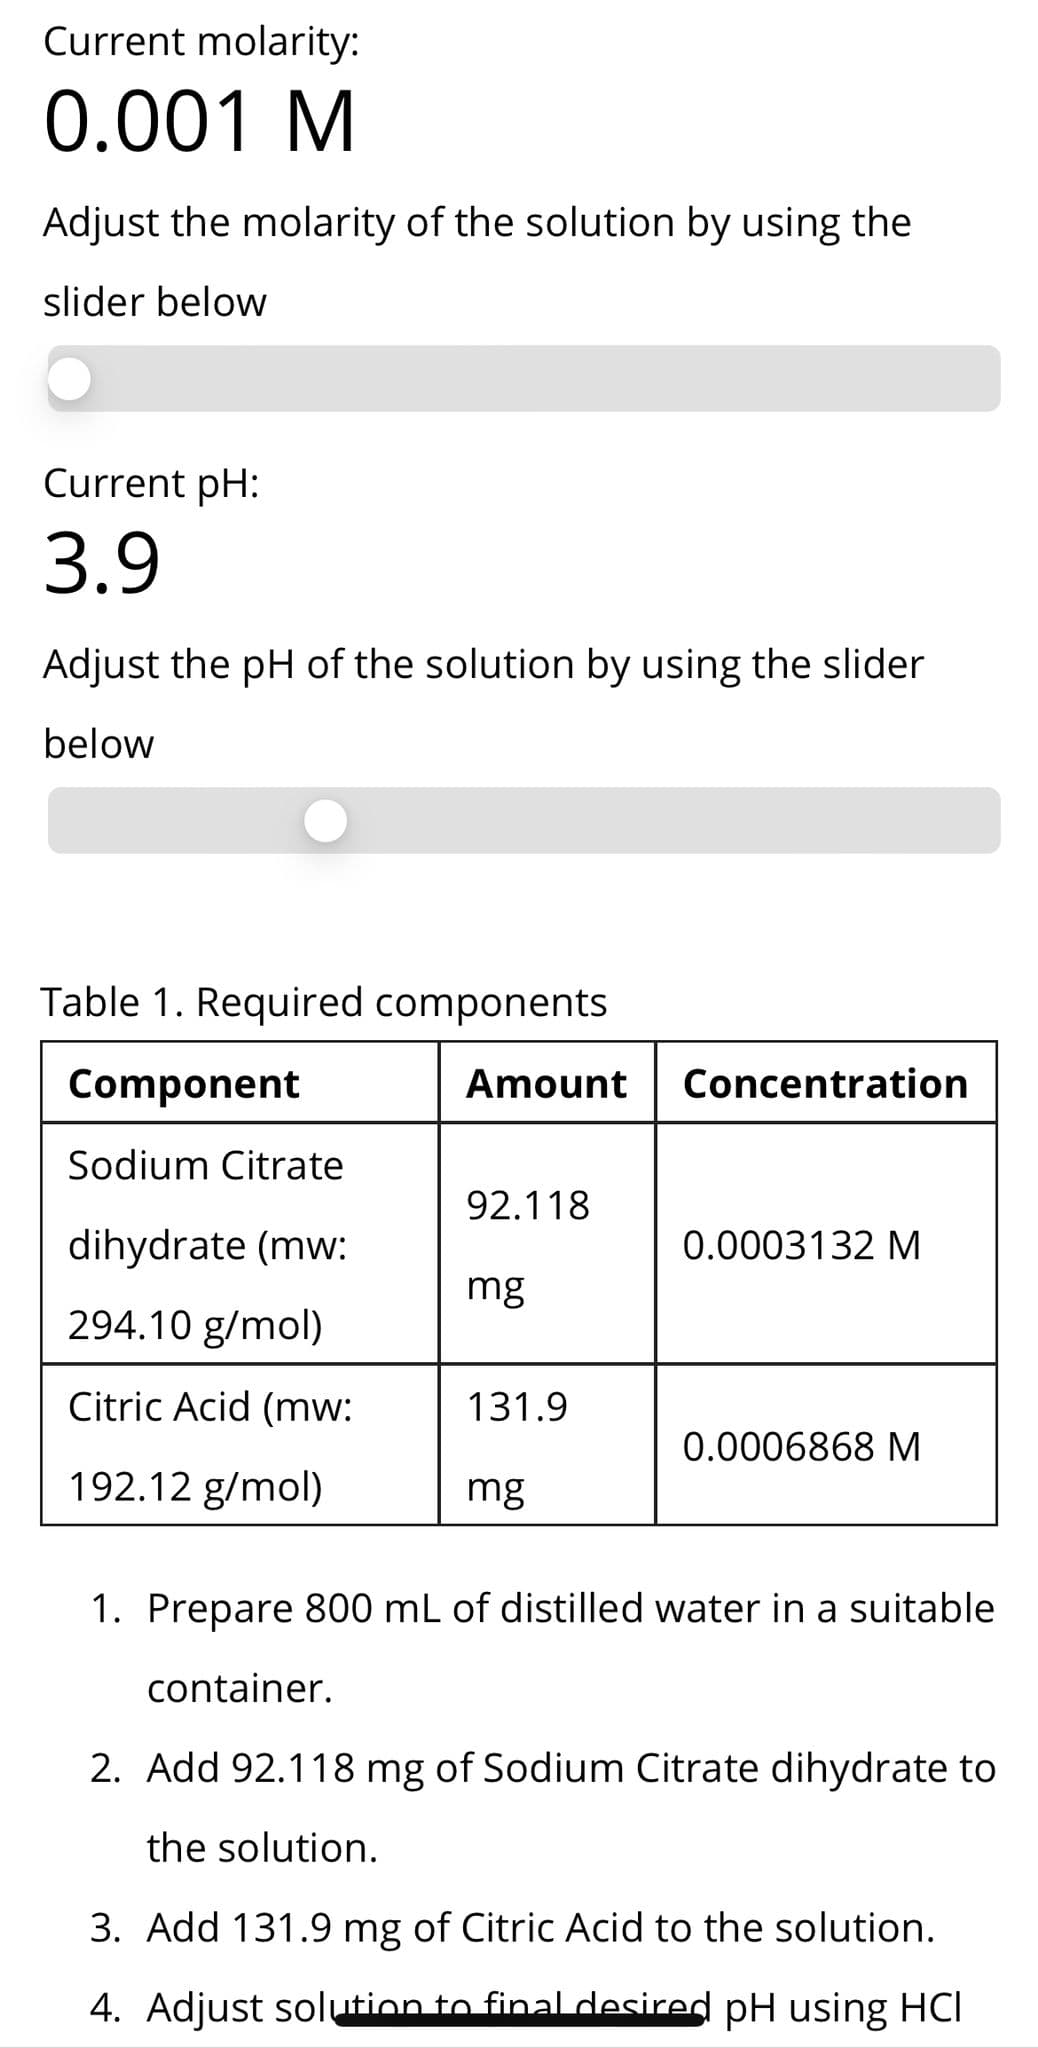 Current molarity:
0.001 M
Adjust the molarity of the solution by using the
slider below
Current pH:
3.9
Adjust the pH of the solution by using the slider
below
Table 1. Required components
Component
Amount Concentration
Sodium Citrate
92.118
dihydrate (mw:
0.0003132 M
mg
294.10 g/mol)
Citric Acid (mw:
131.9
0.0006868 M
192.12 g/mol)
mg
1. Prepare 800 mL of distilled water in a suitable
container.
2. Add 92.118 mg of Sodium Citrate dihydrate to
the solution.
3. Add 131.9 mg of Citric Acid to the solution.
4. Adjust solution to final desired pH using HCI